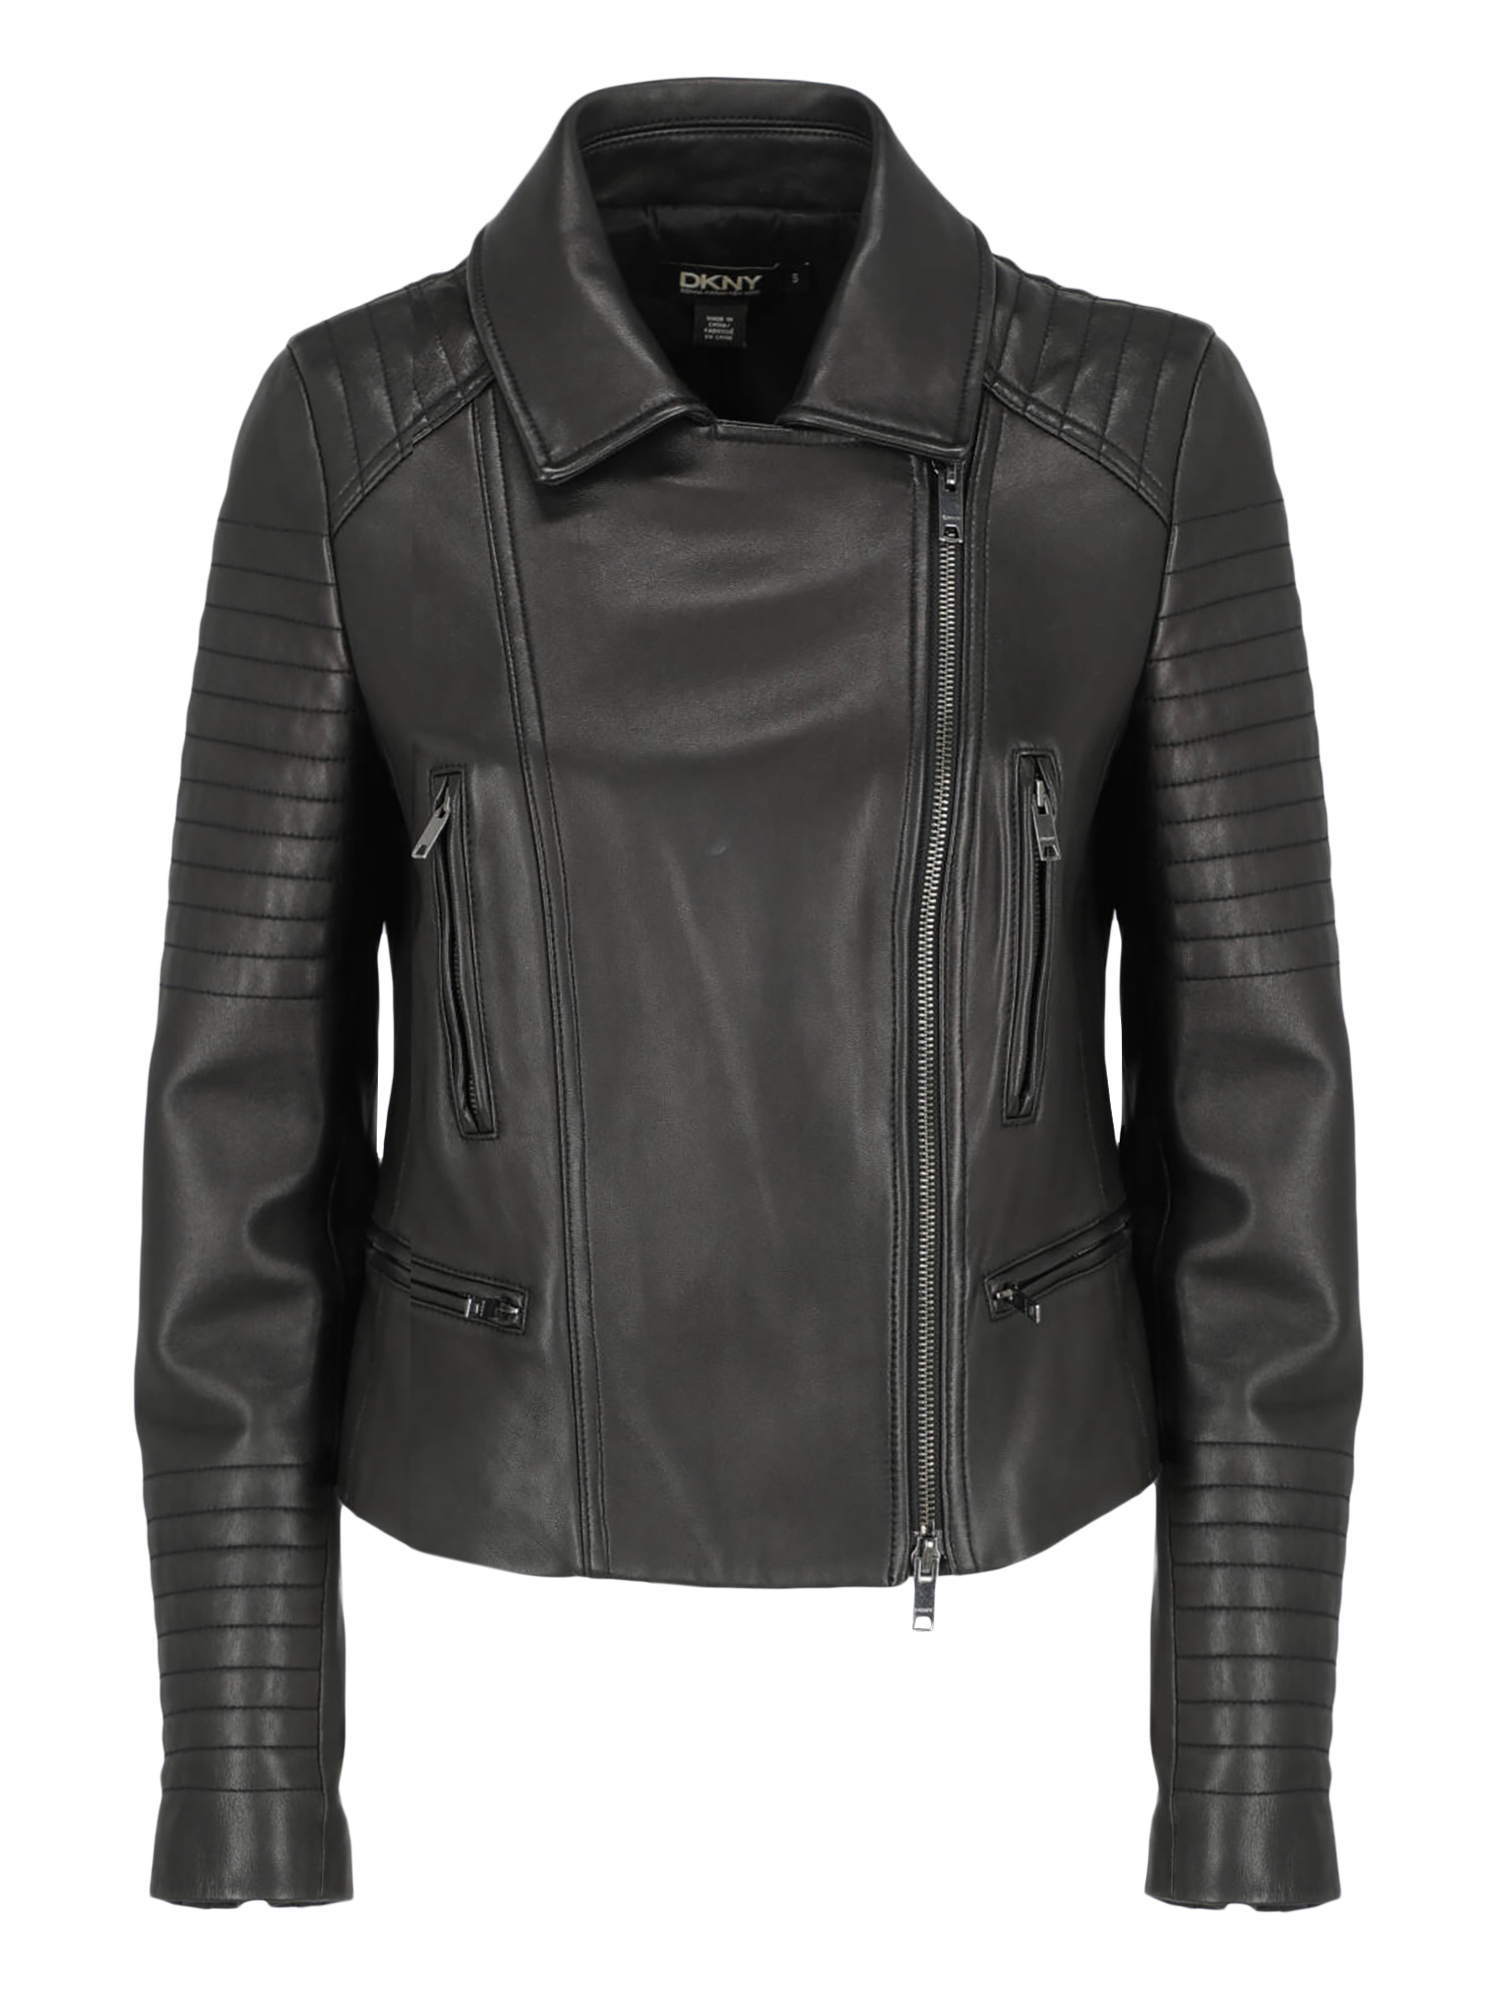 Pre-owned Dkny Women's Jackets -  - In Black Leather